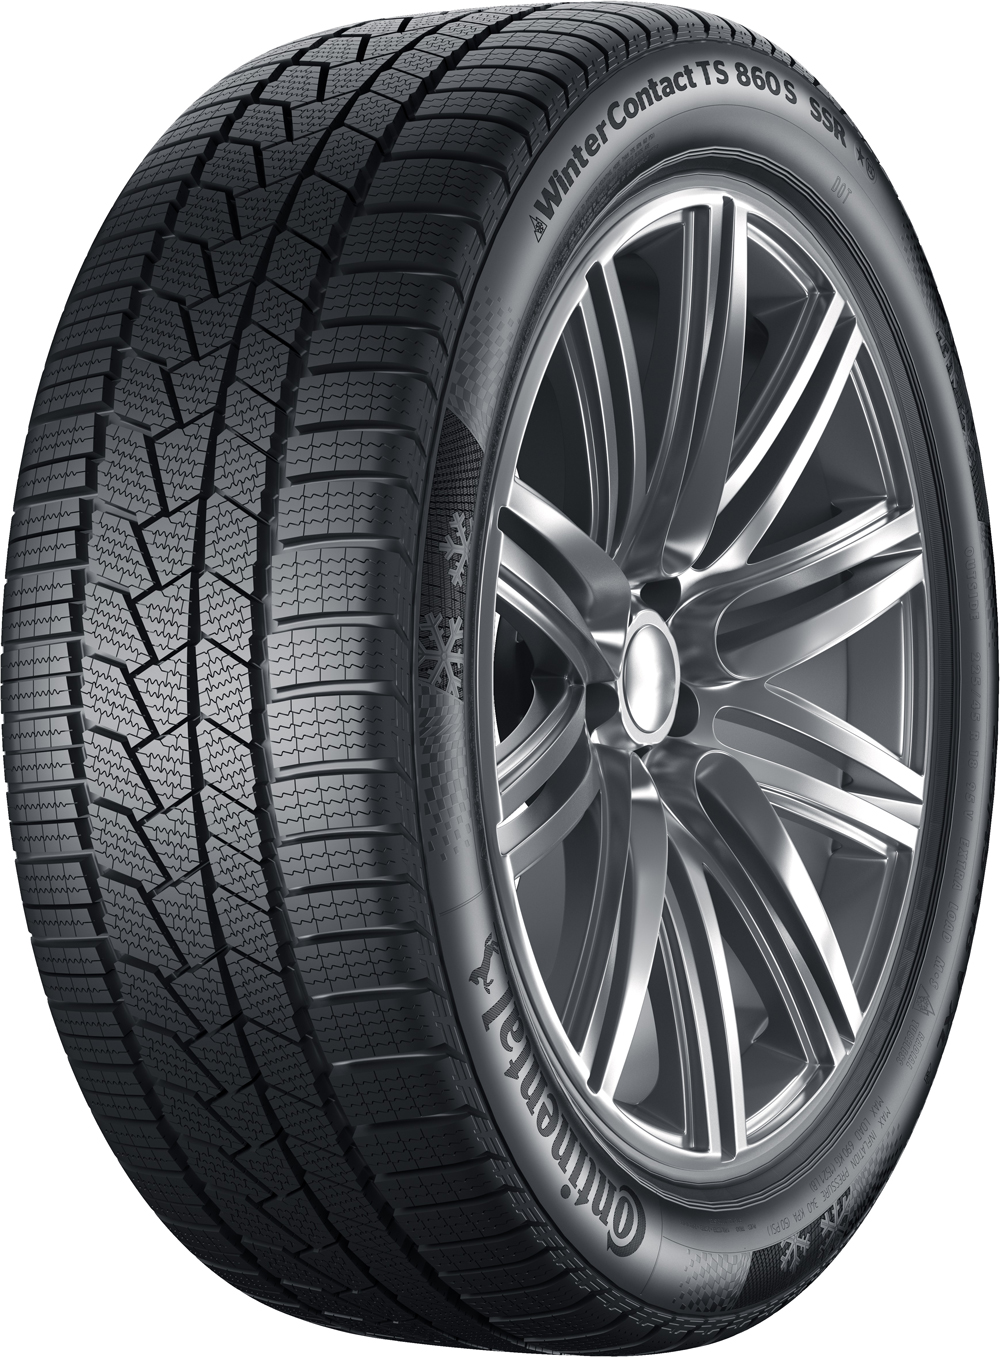 Anvelope auto CONTINENTAL WinterContact TS 860 S SSR XL RFT 315/35 R20 110V